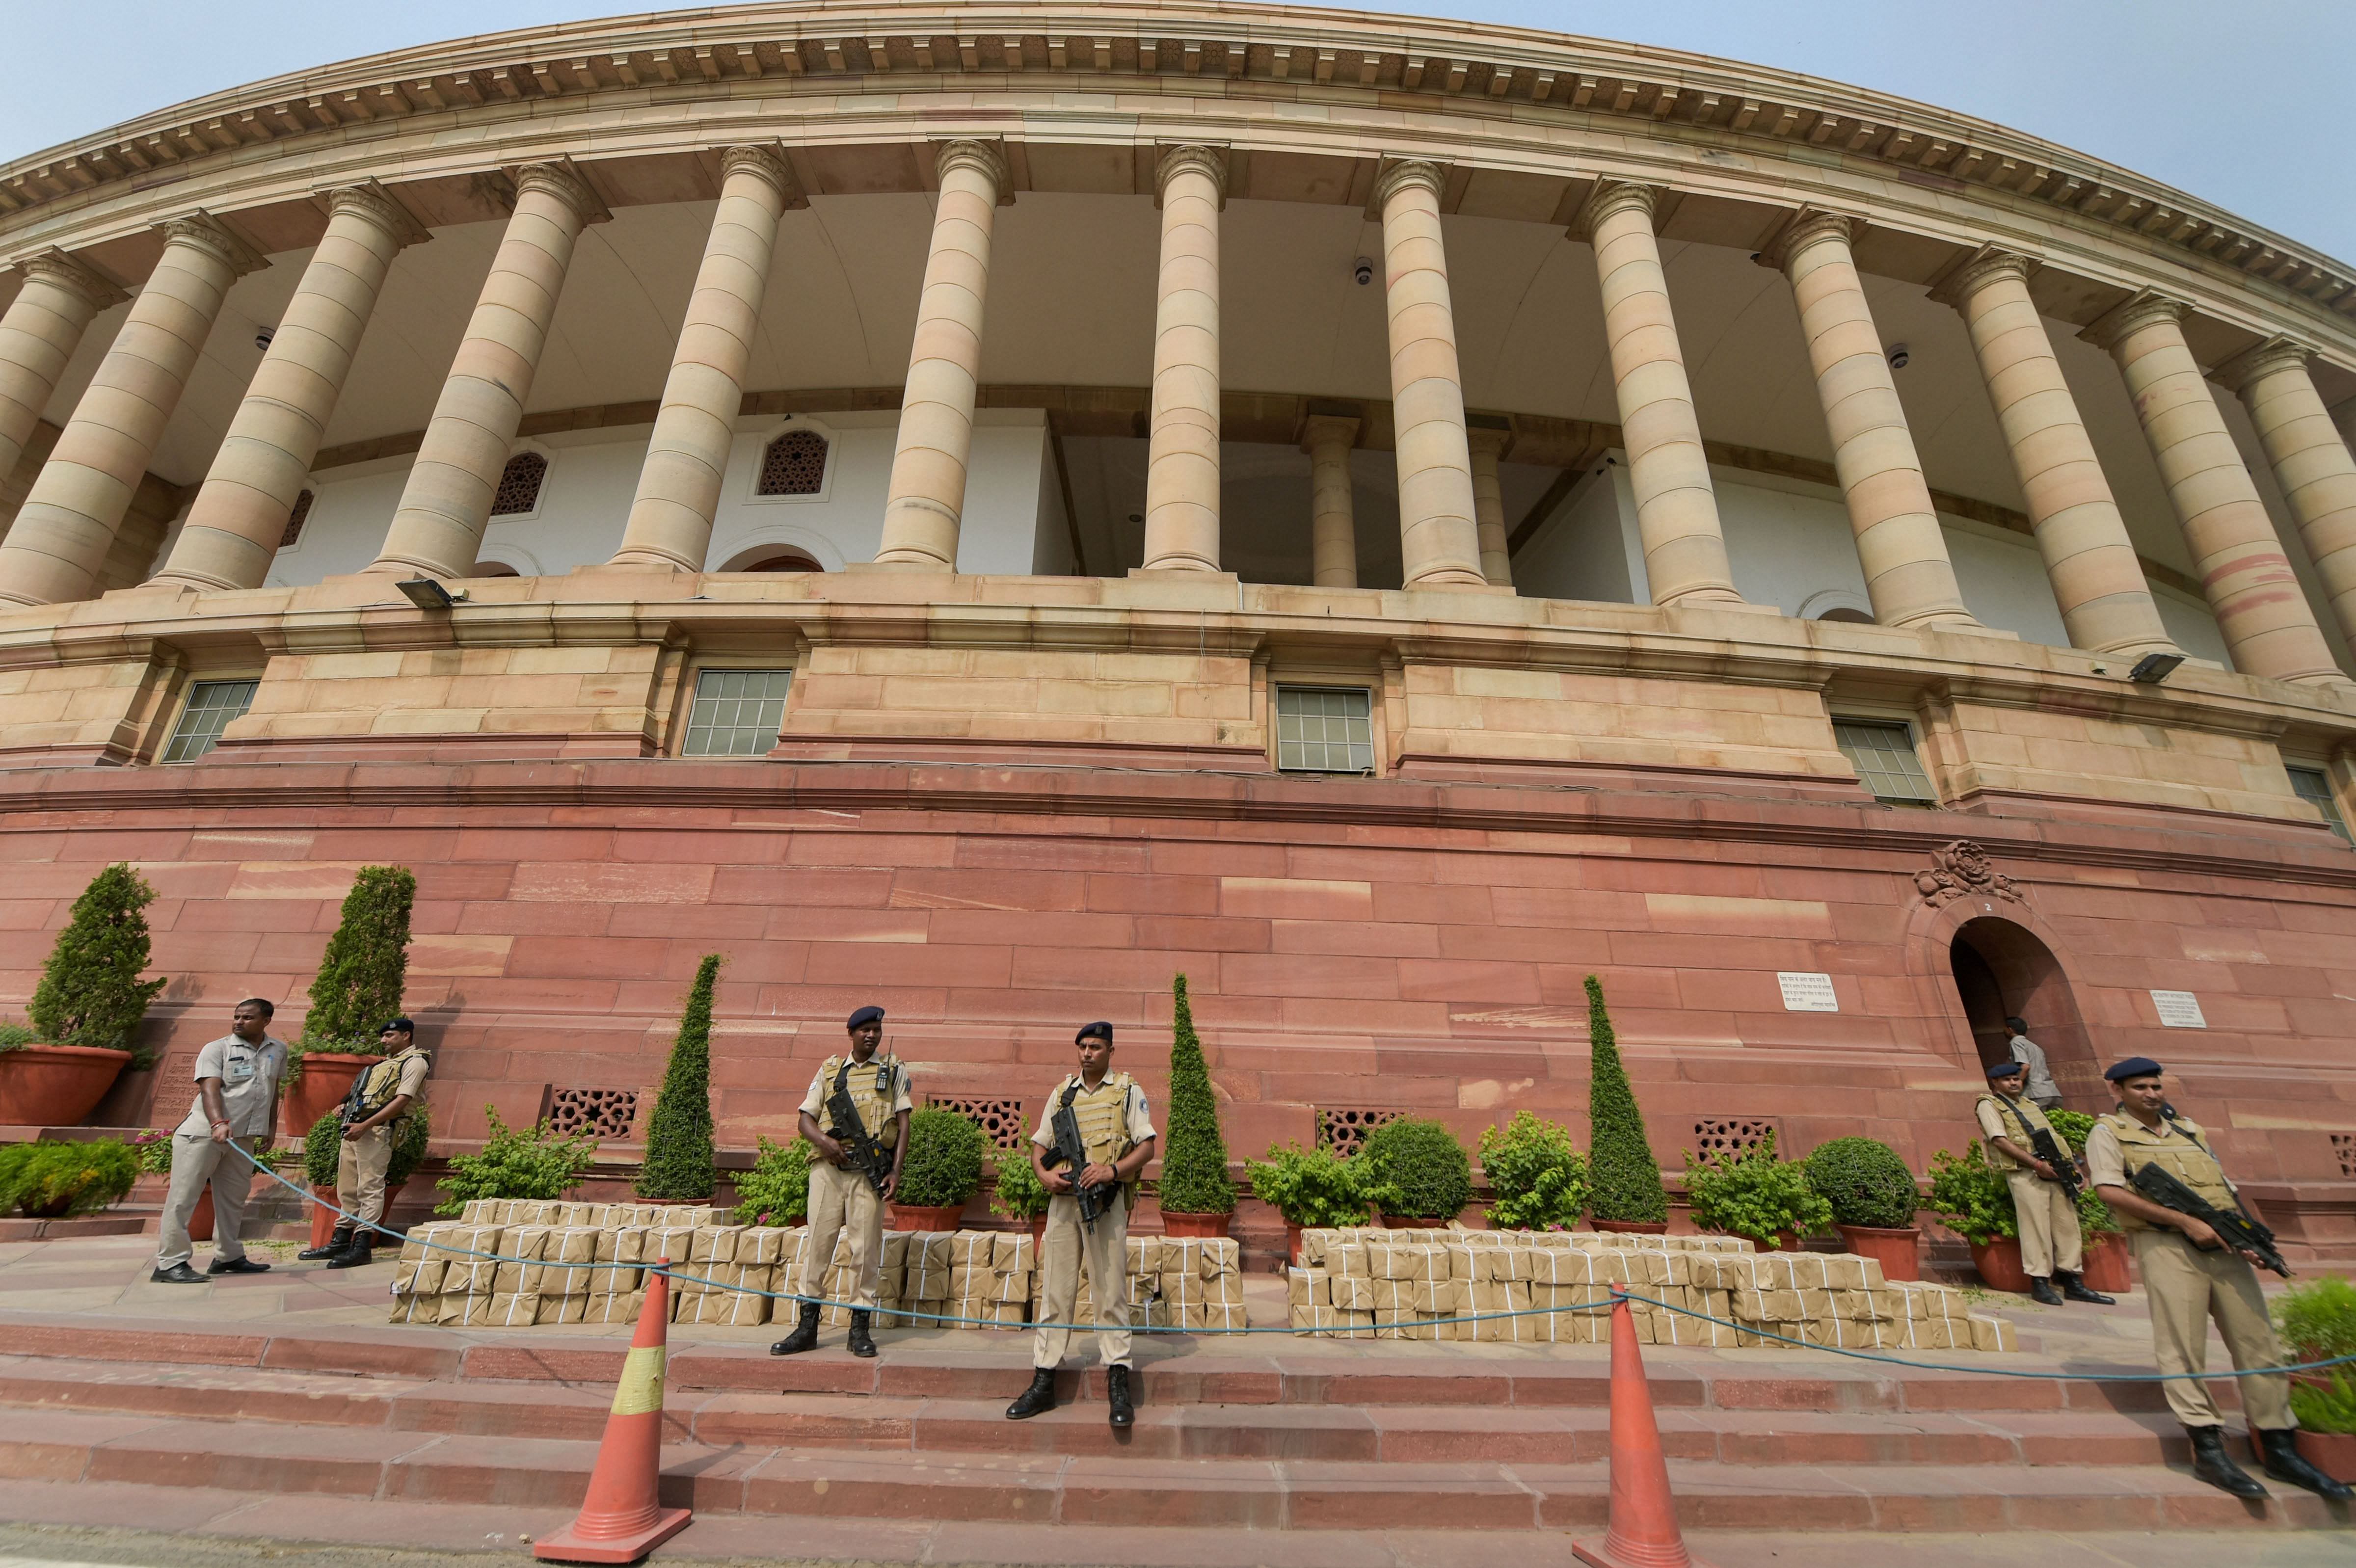 Security personnel stand guard in front of the bundles containing the copies of Economic Survey 2018-19, at Parliament, in New Delhi. (PTI Photo)